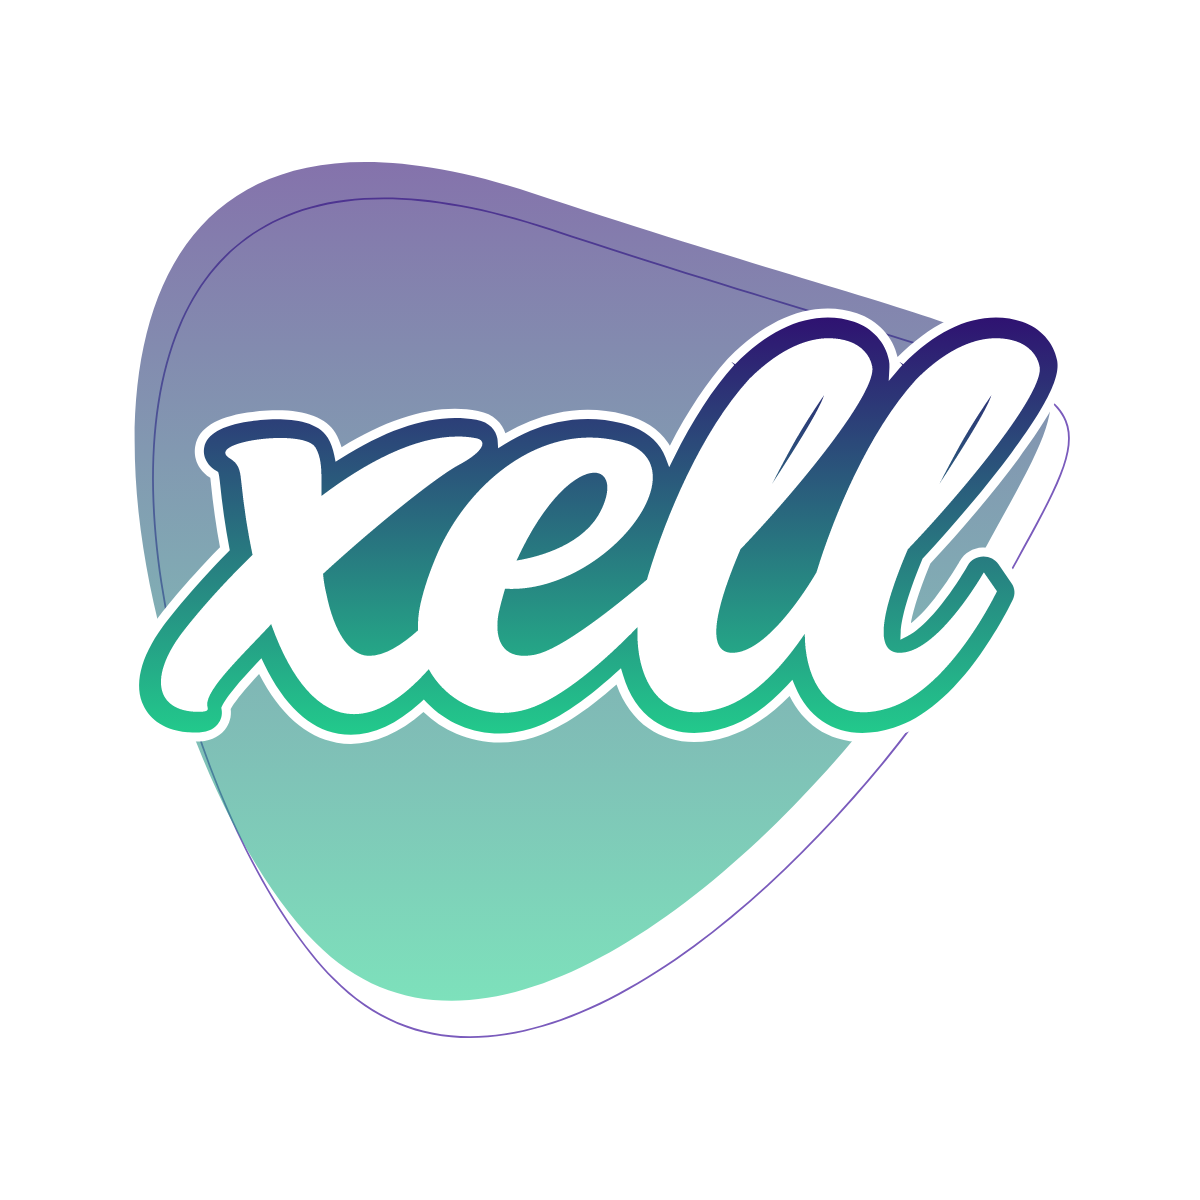 Hire Shopify Experts to integrate Xell Shop app into a Shopify store